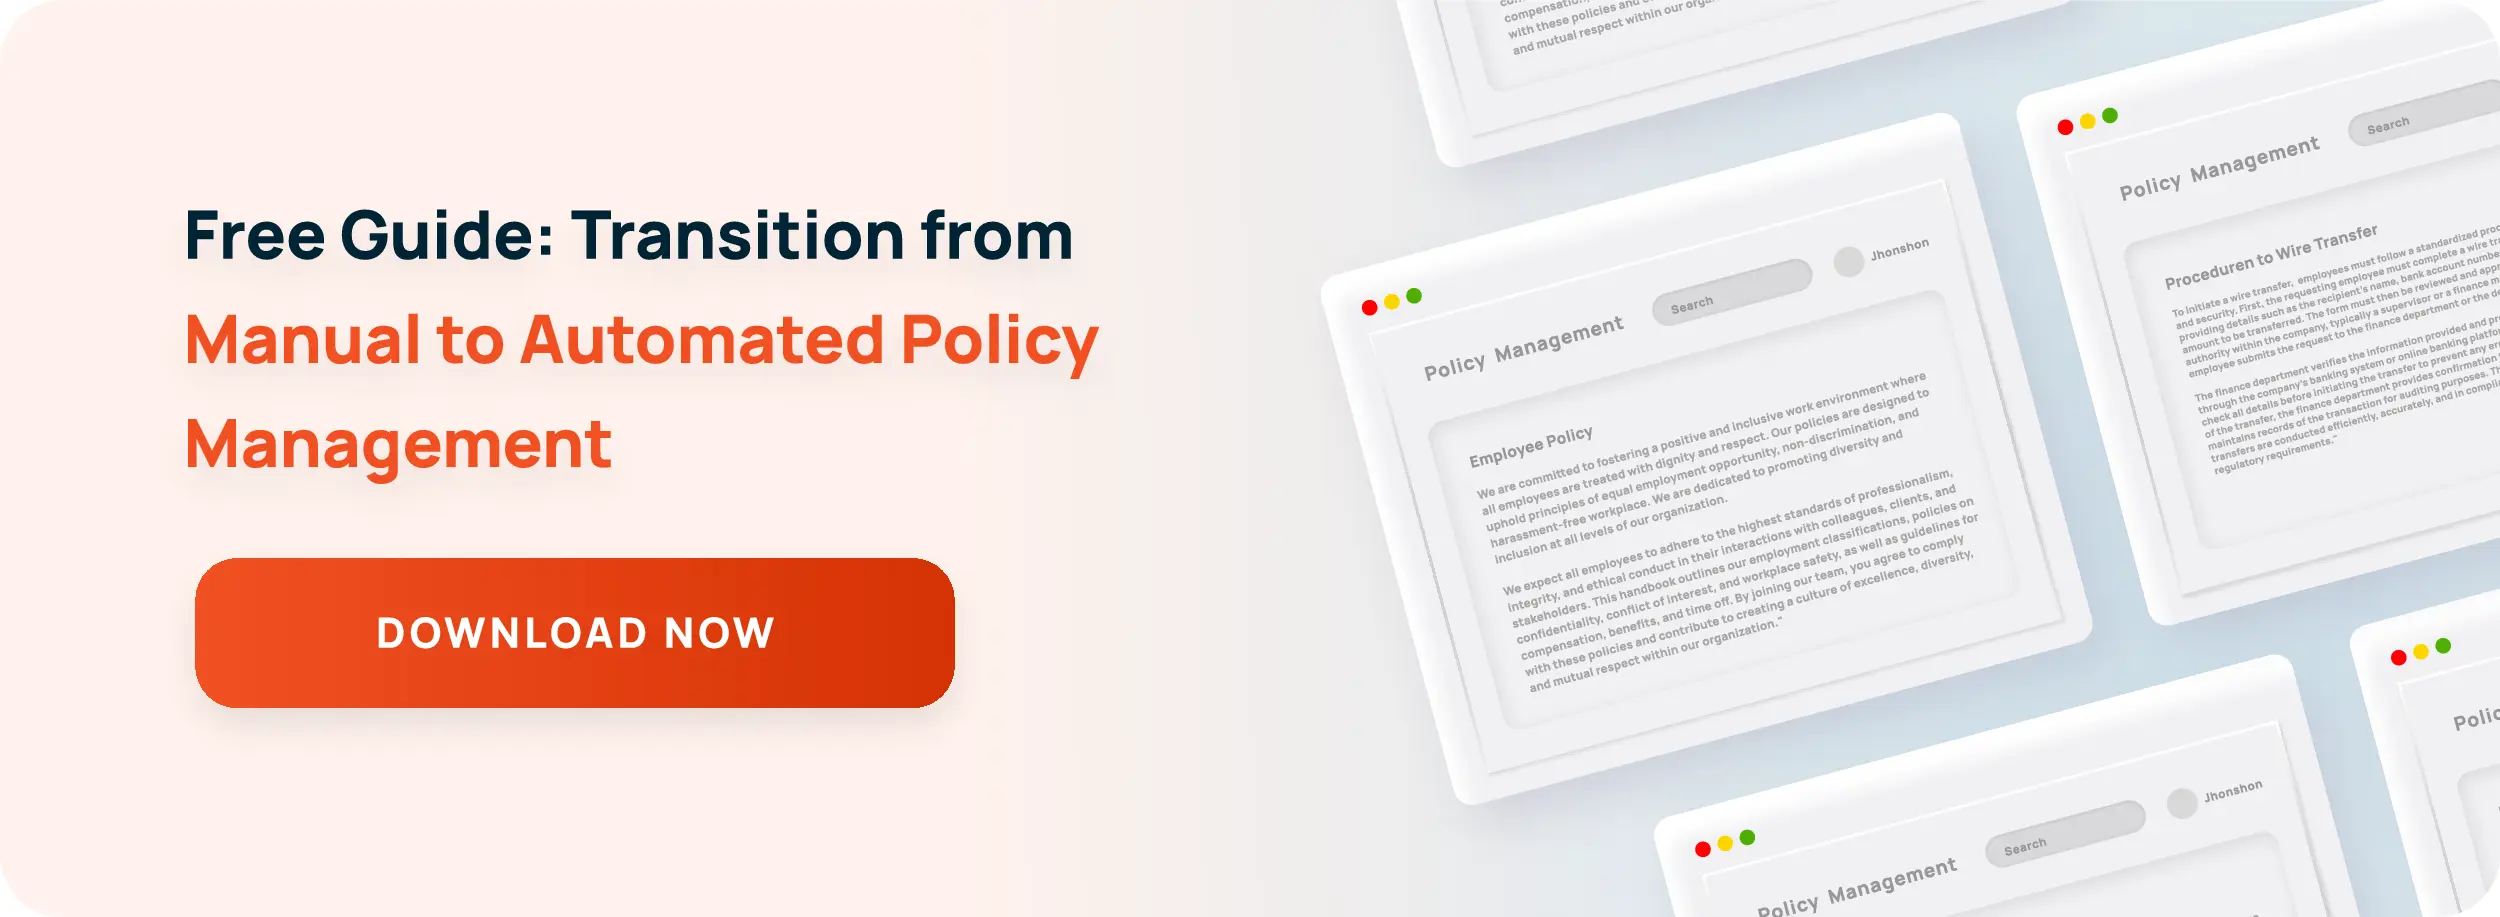 Free Guide: Transition from Manual to Automated Policy Management